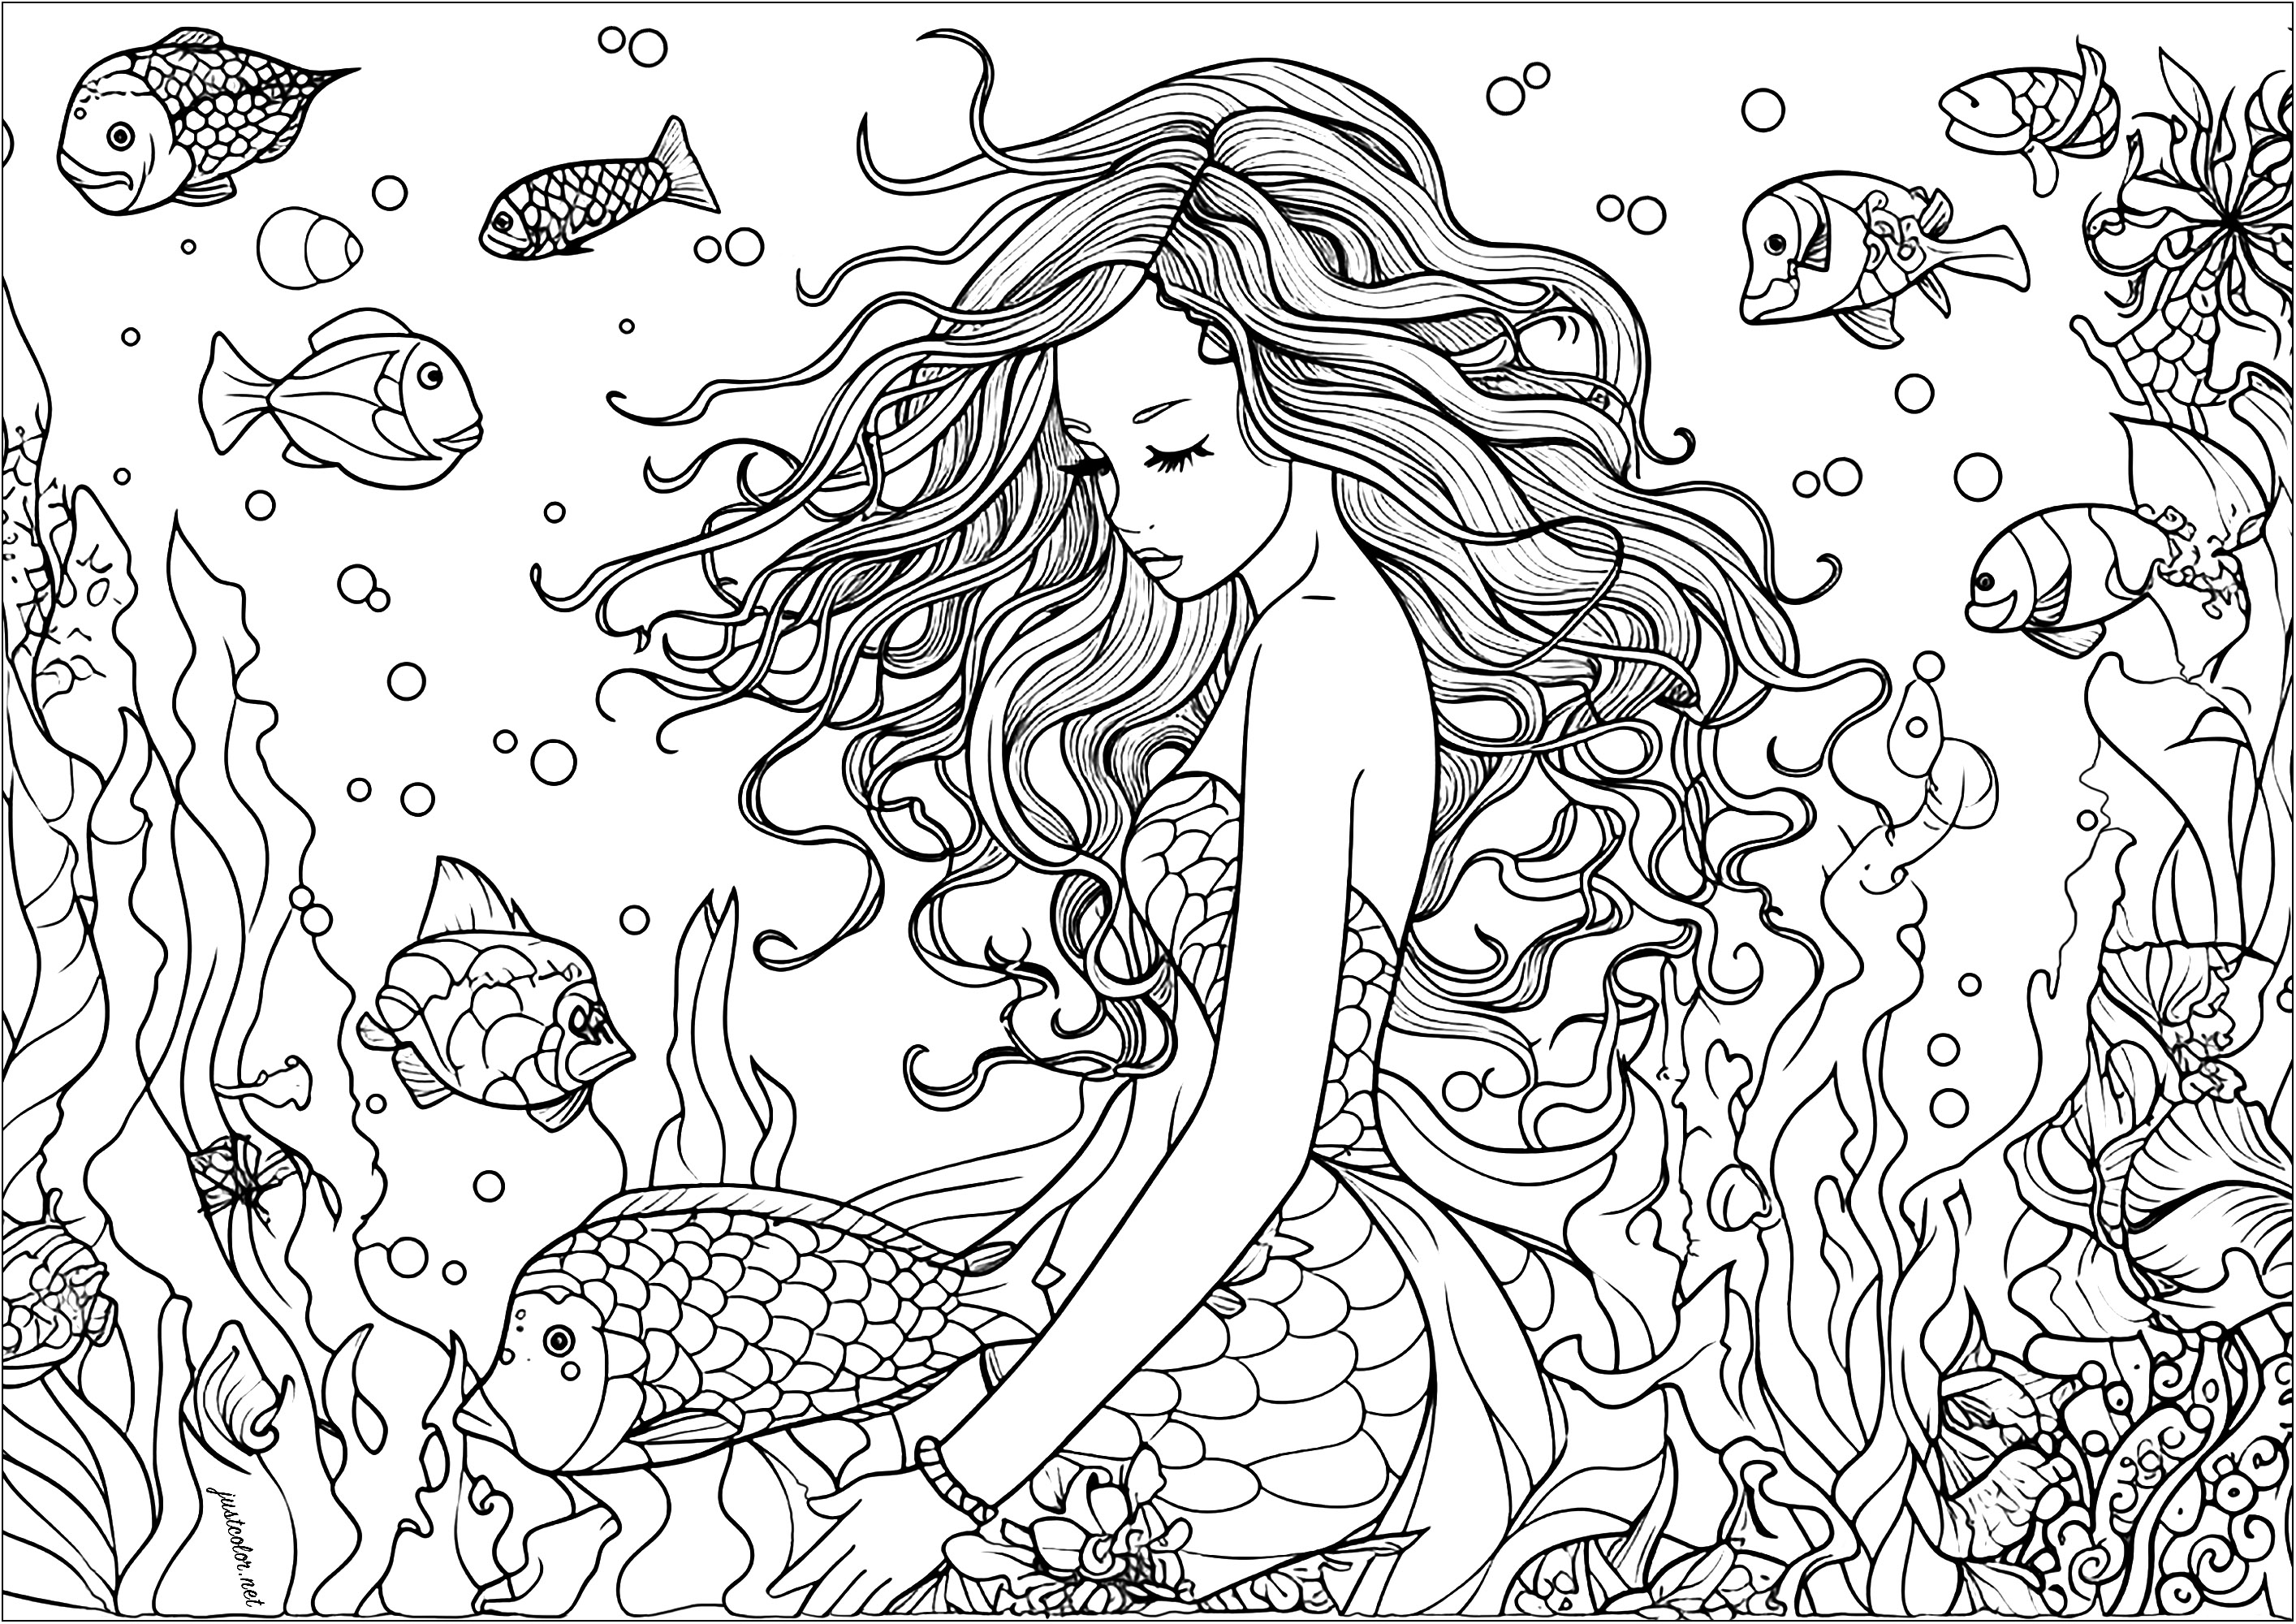 Coloring of a beautiful mermaid surrounded by fishes. This mermaid has long, wavy hair. Color it and the beautiful fish that surround it, as well as the seaweed and coral that are part of this magnificent underwater landscape.